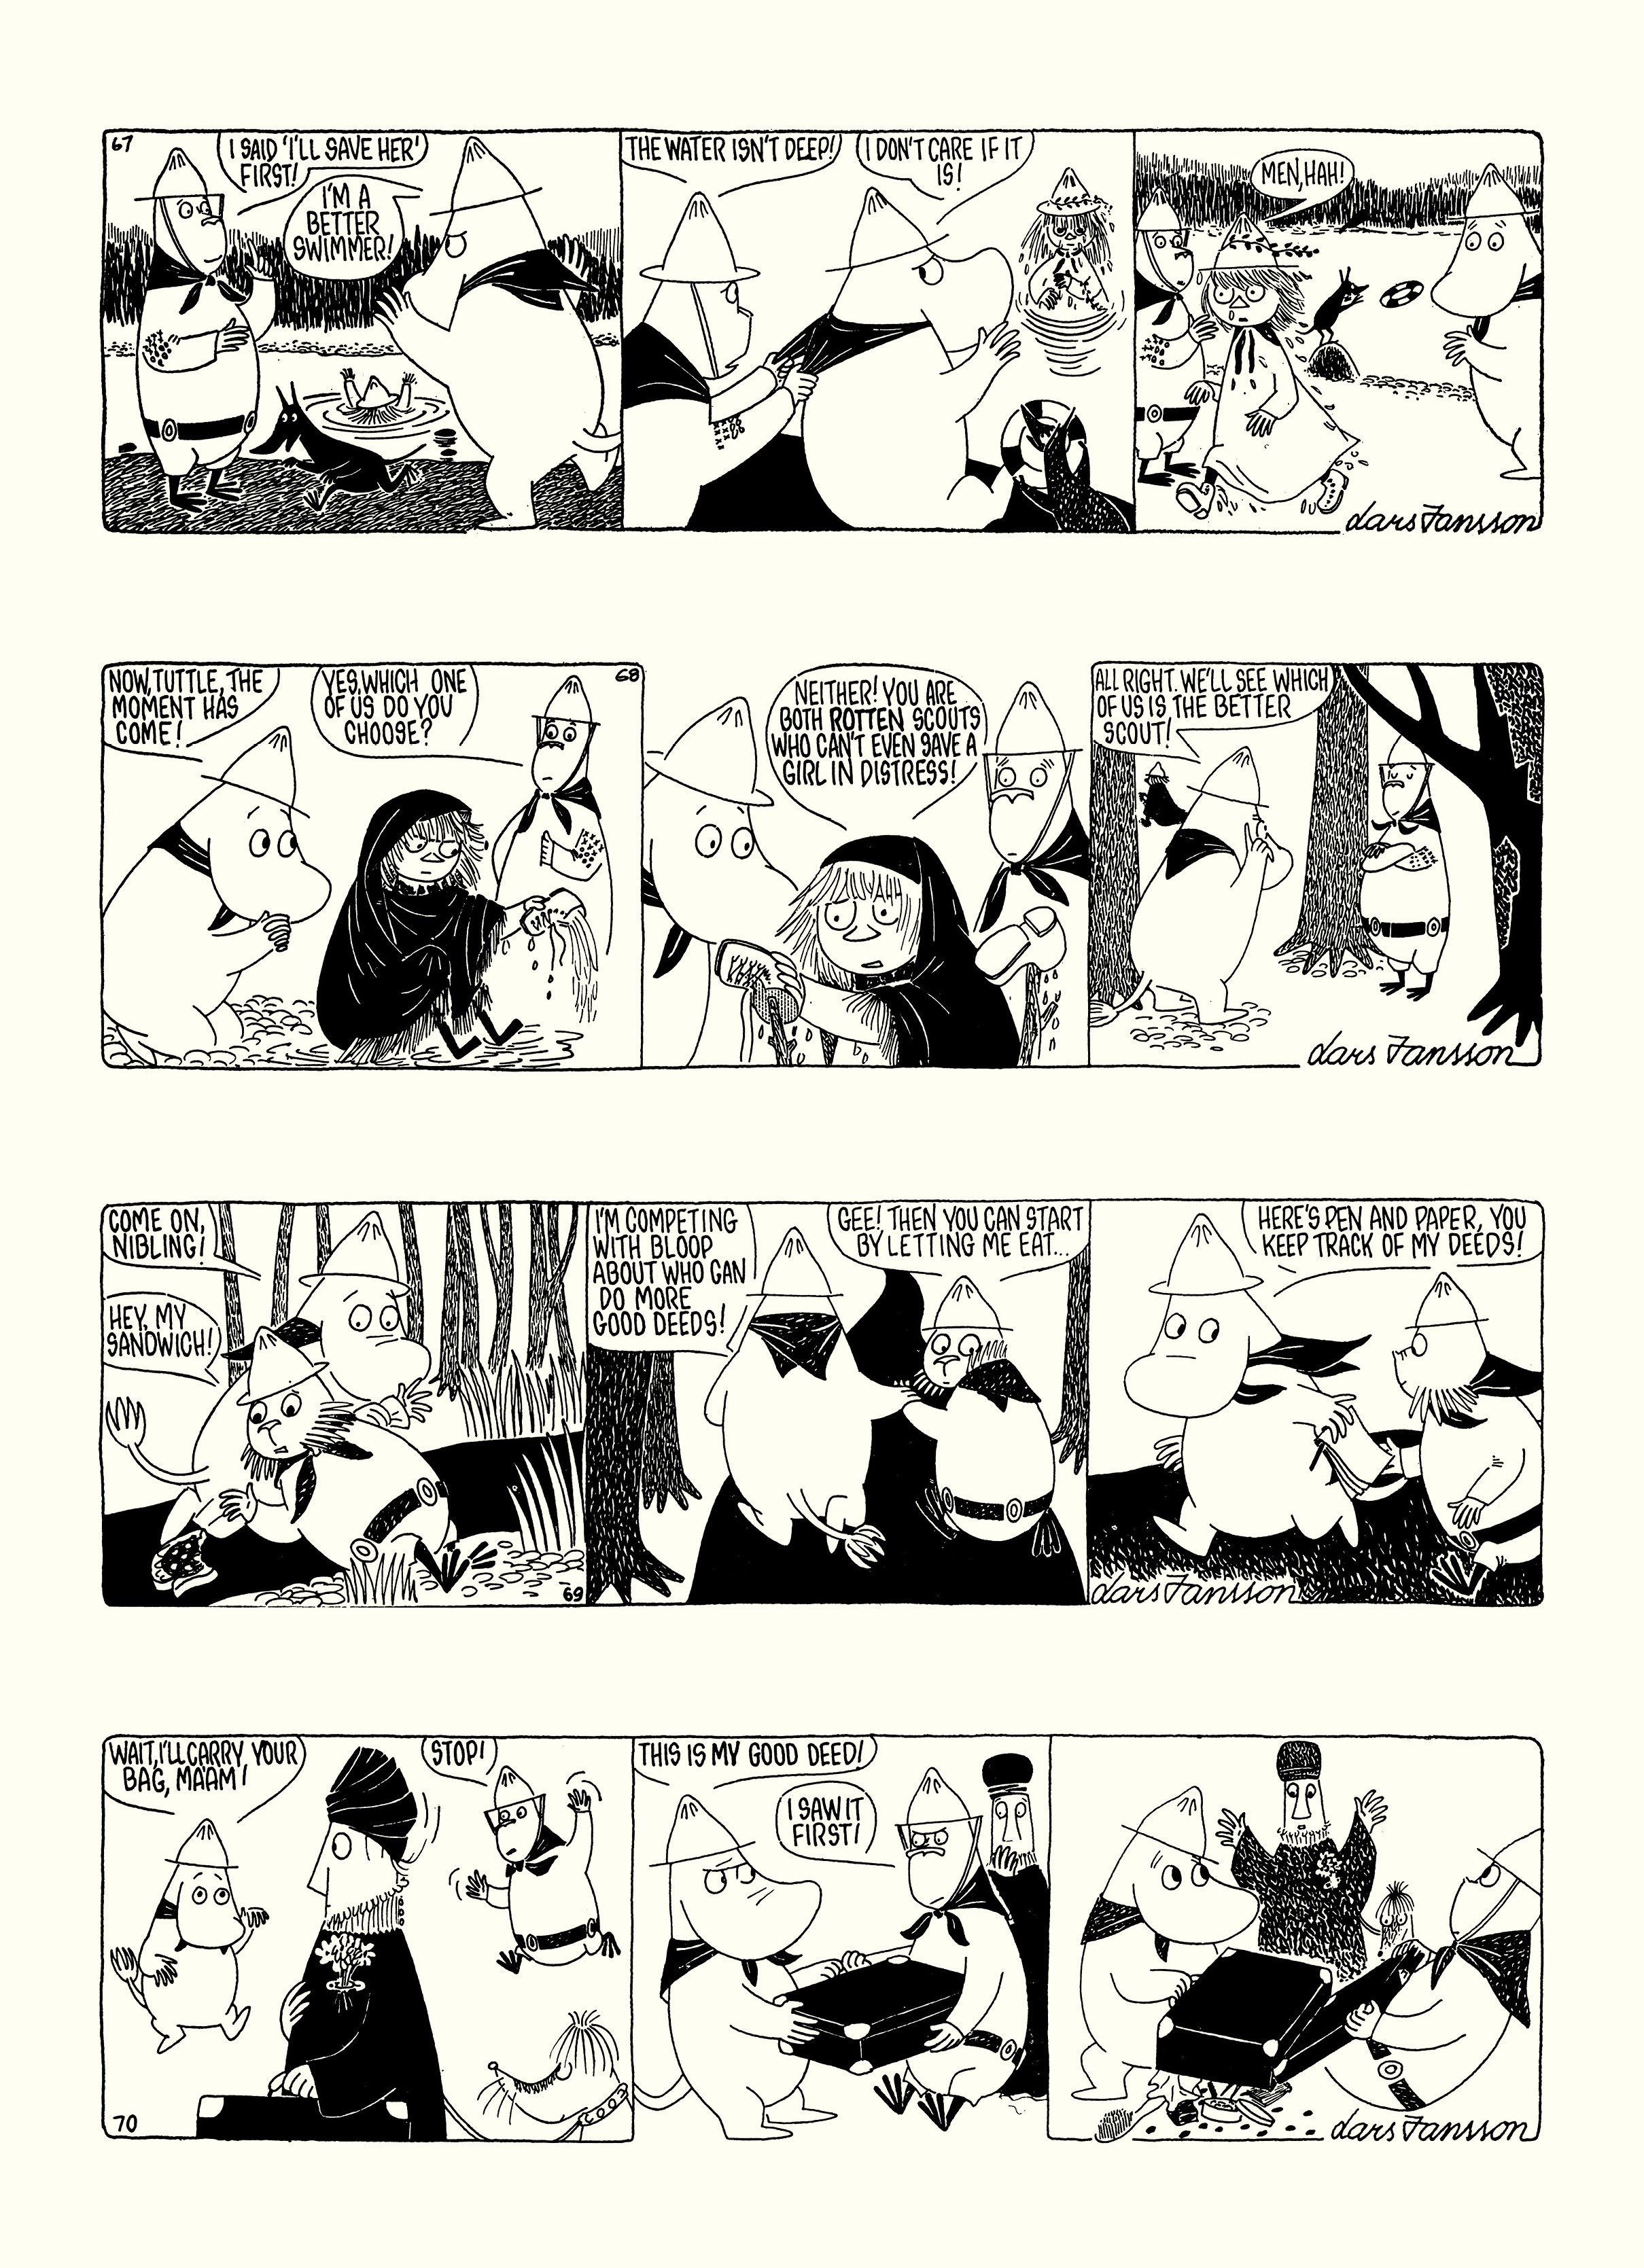 Read online Moomin: The Complete Lars Jansson Comic Strip comic -  Issue # TPB 7 - 44